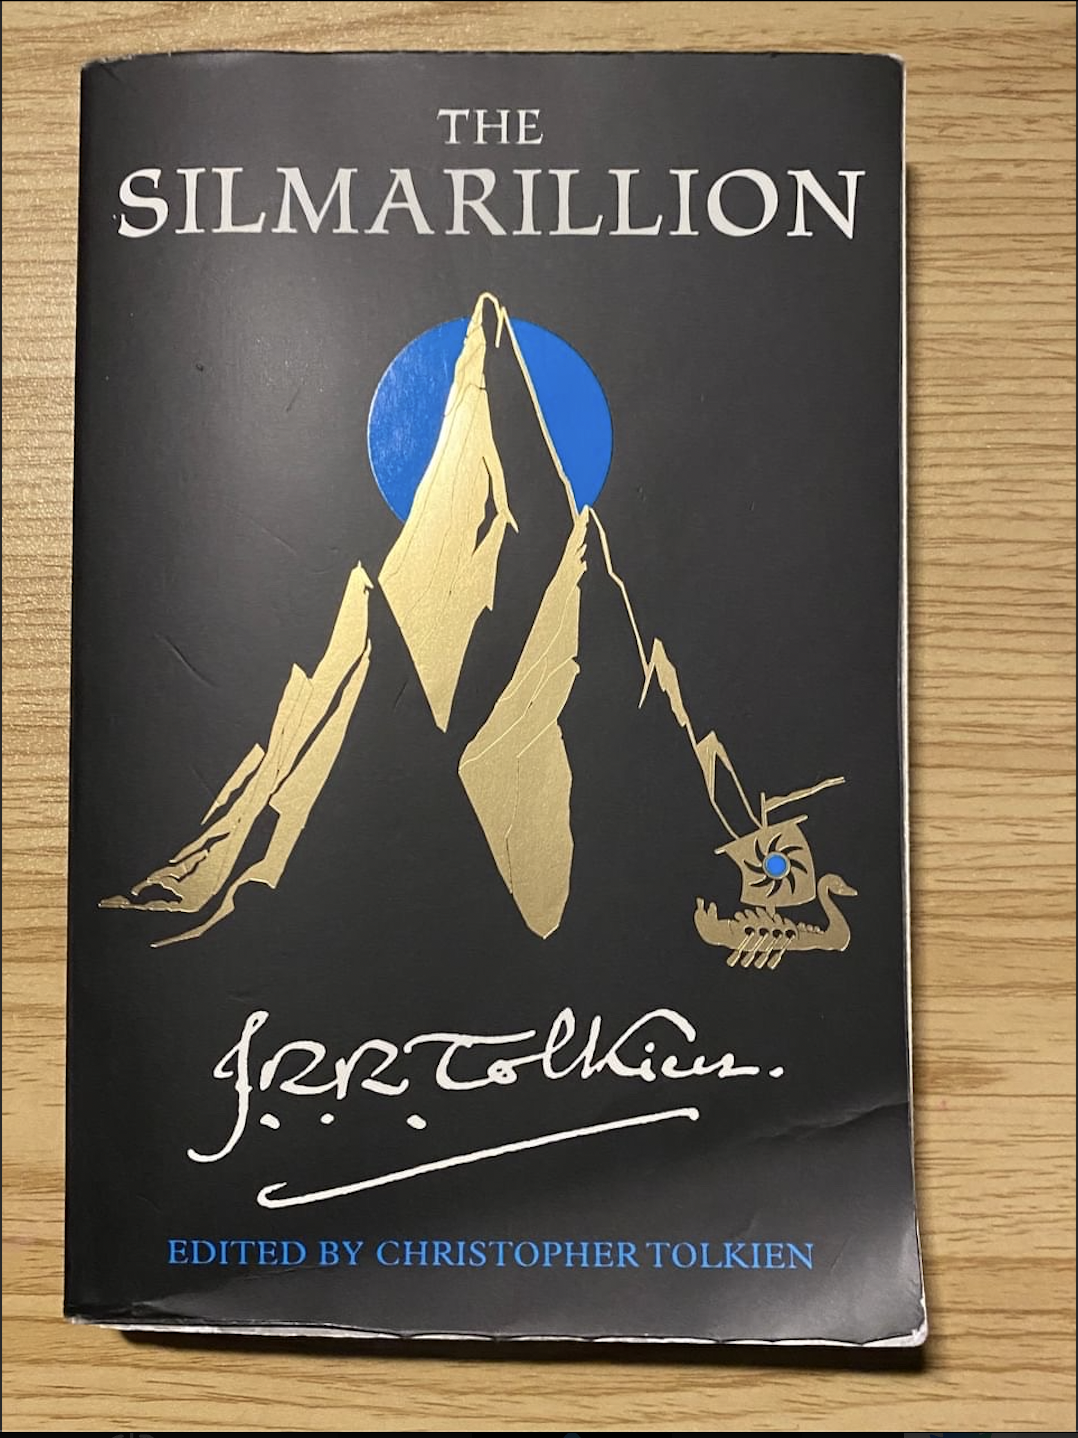 A copy of The Silmarillion by J.R.R Tolkien 